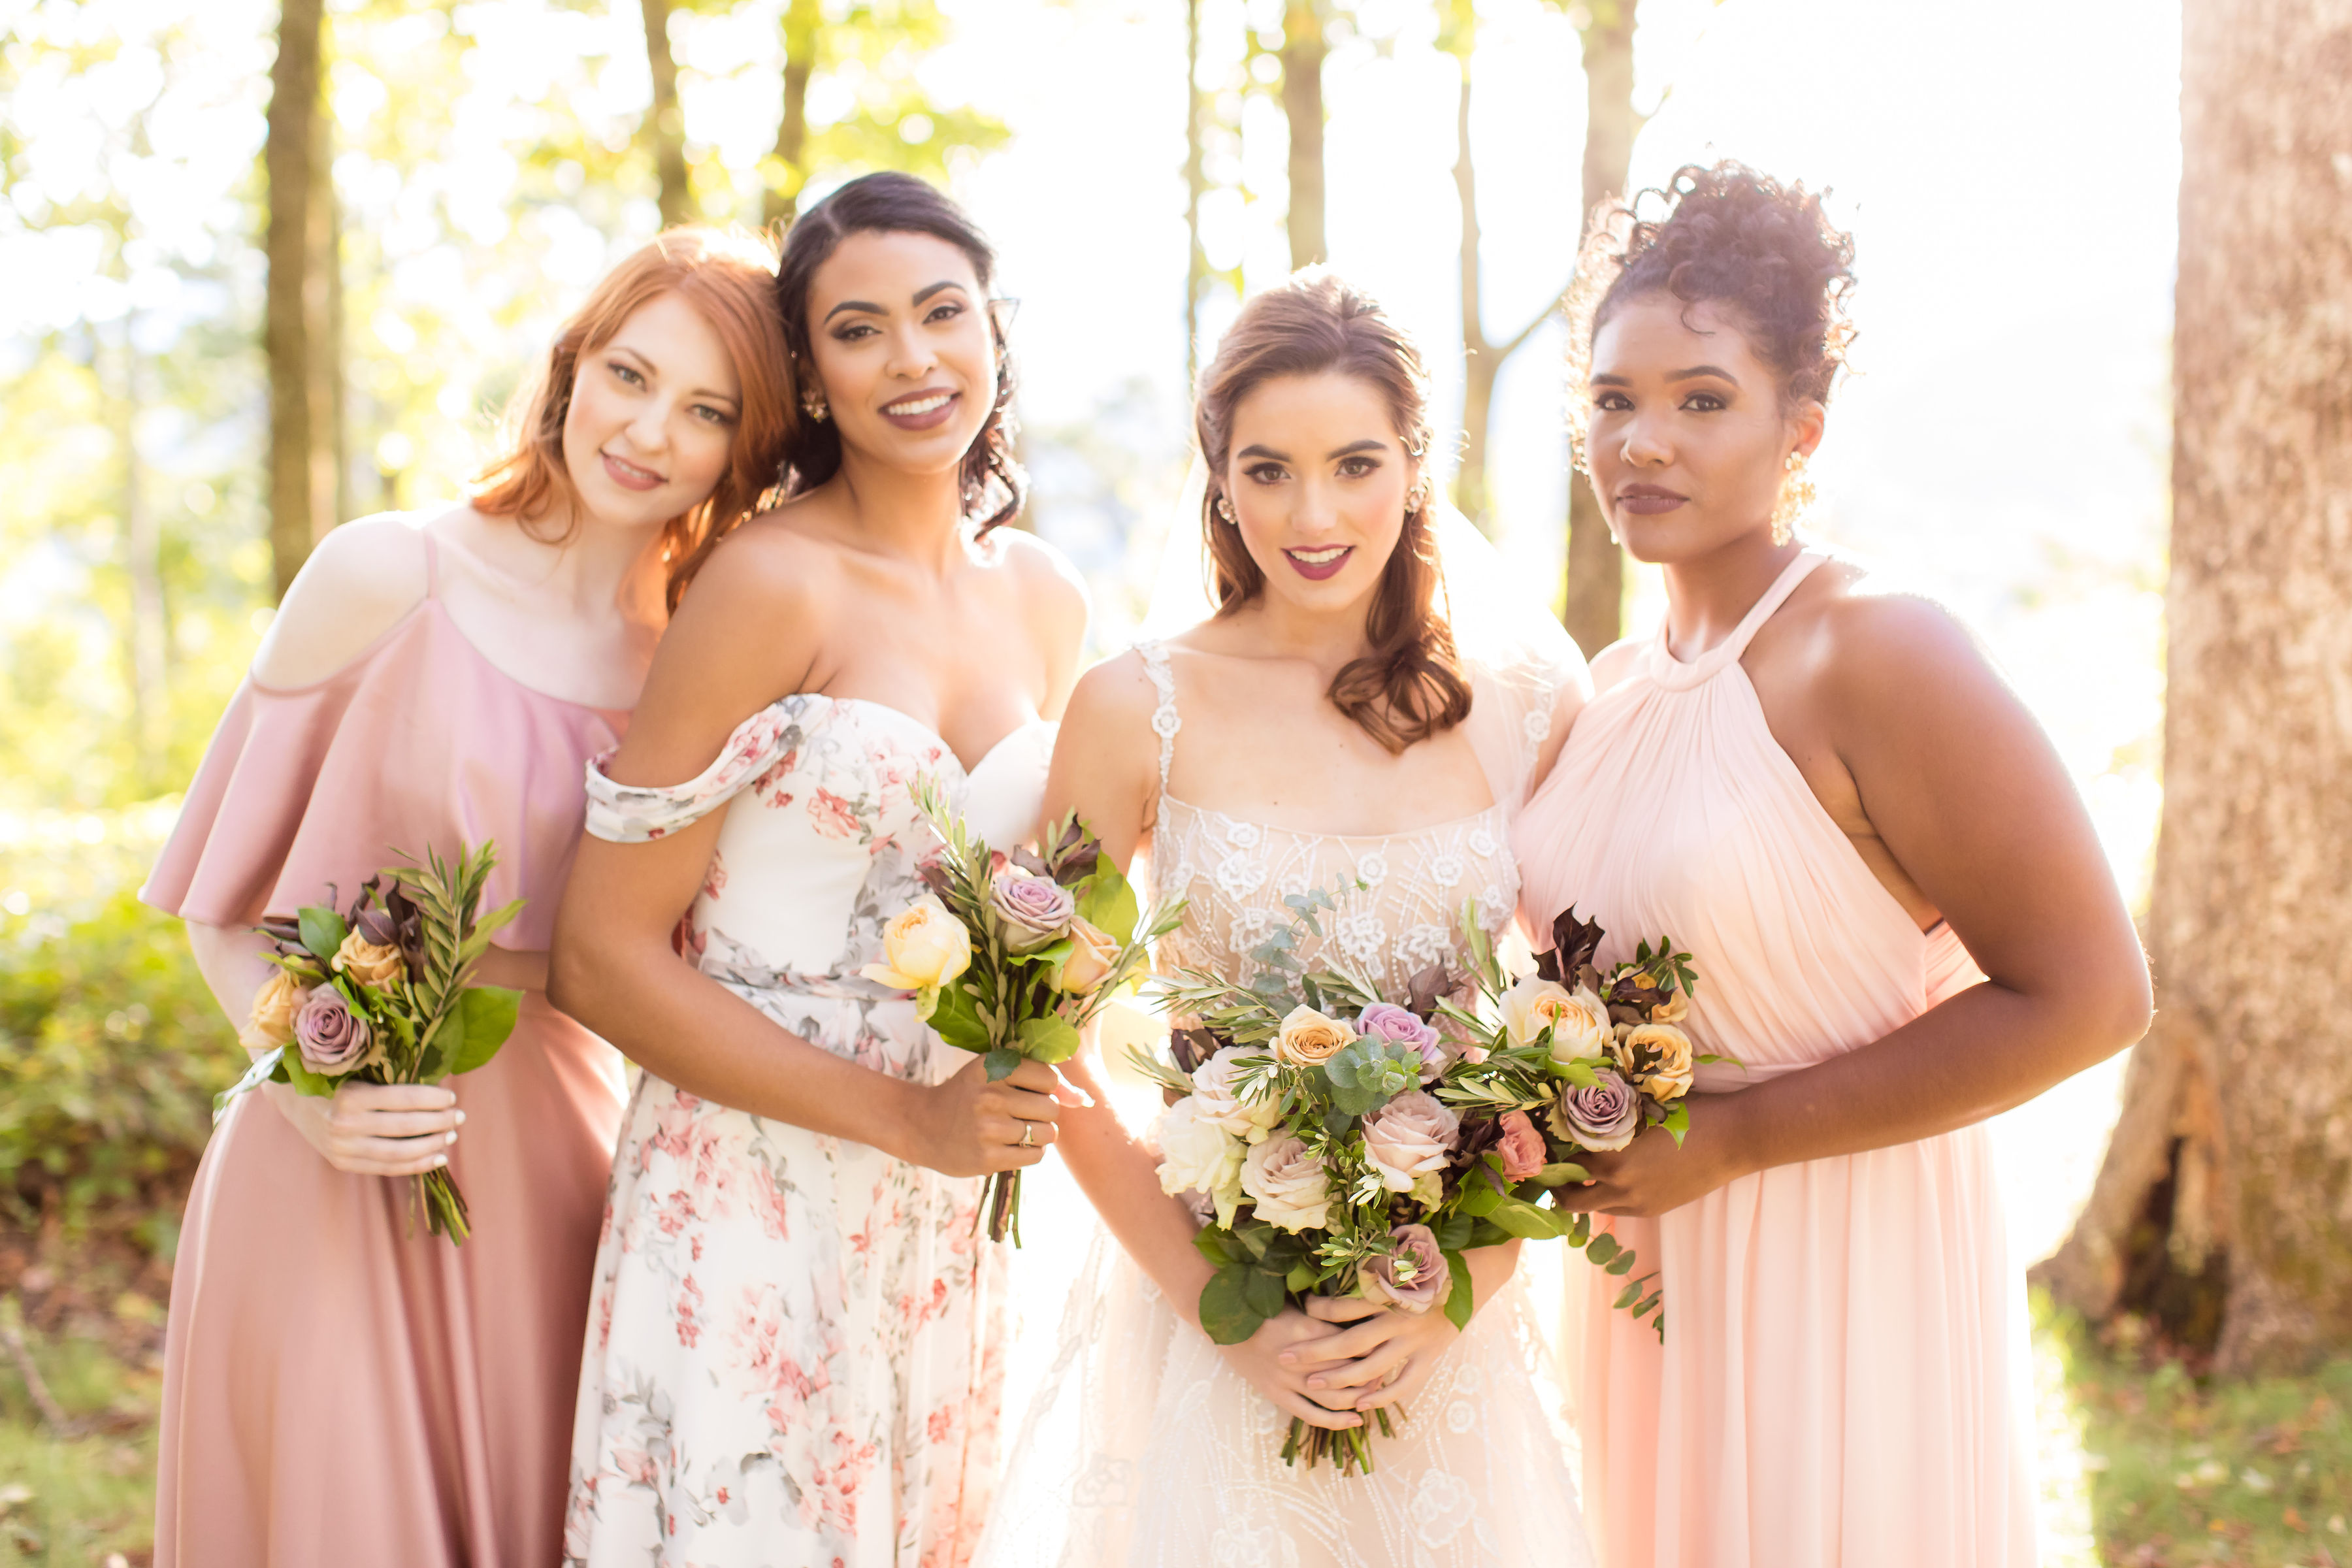 4 Ways To Make Your Maid of Honor Stand Out | Kleinfeld Bridal